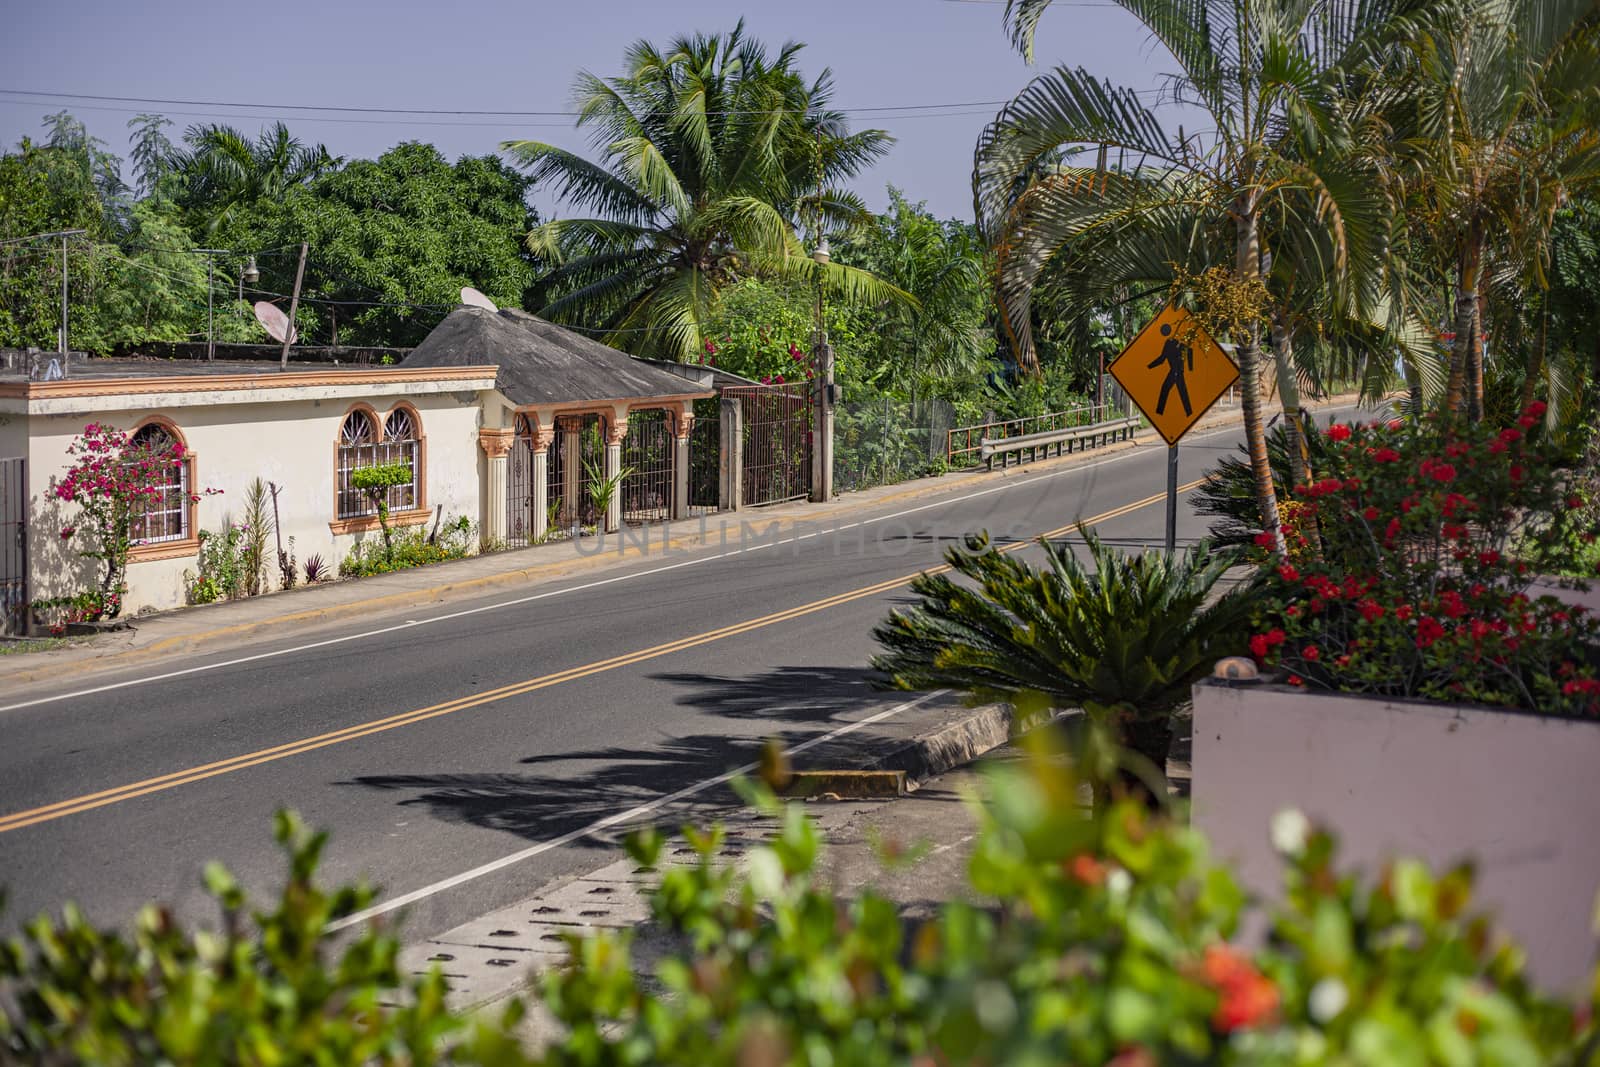 PLAYA LIMON, DOMINICAN REPUBLIC 28 DECEMBER 2019: Country road in Dominican republic